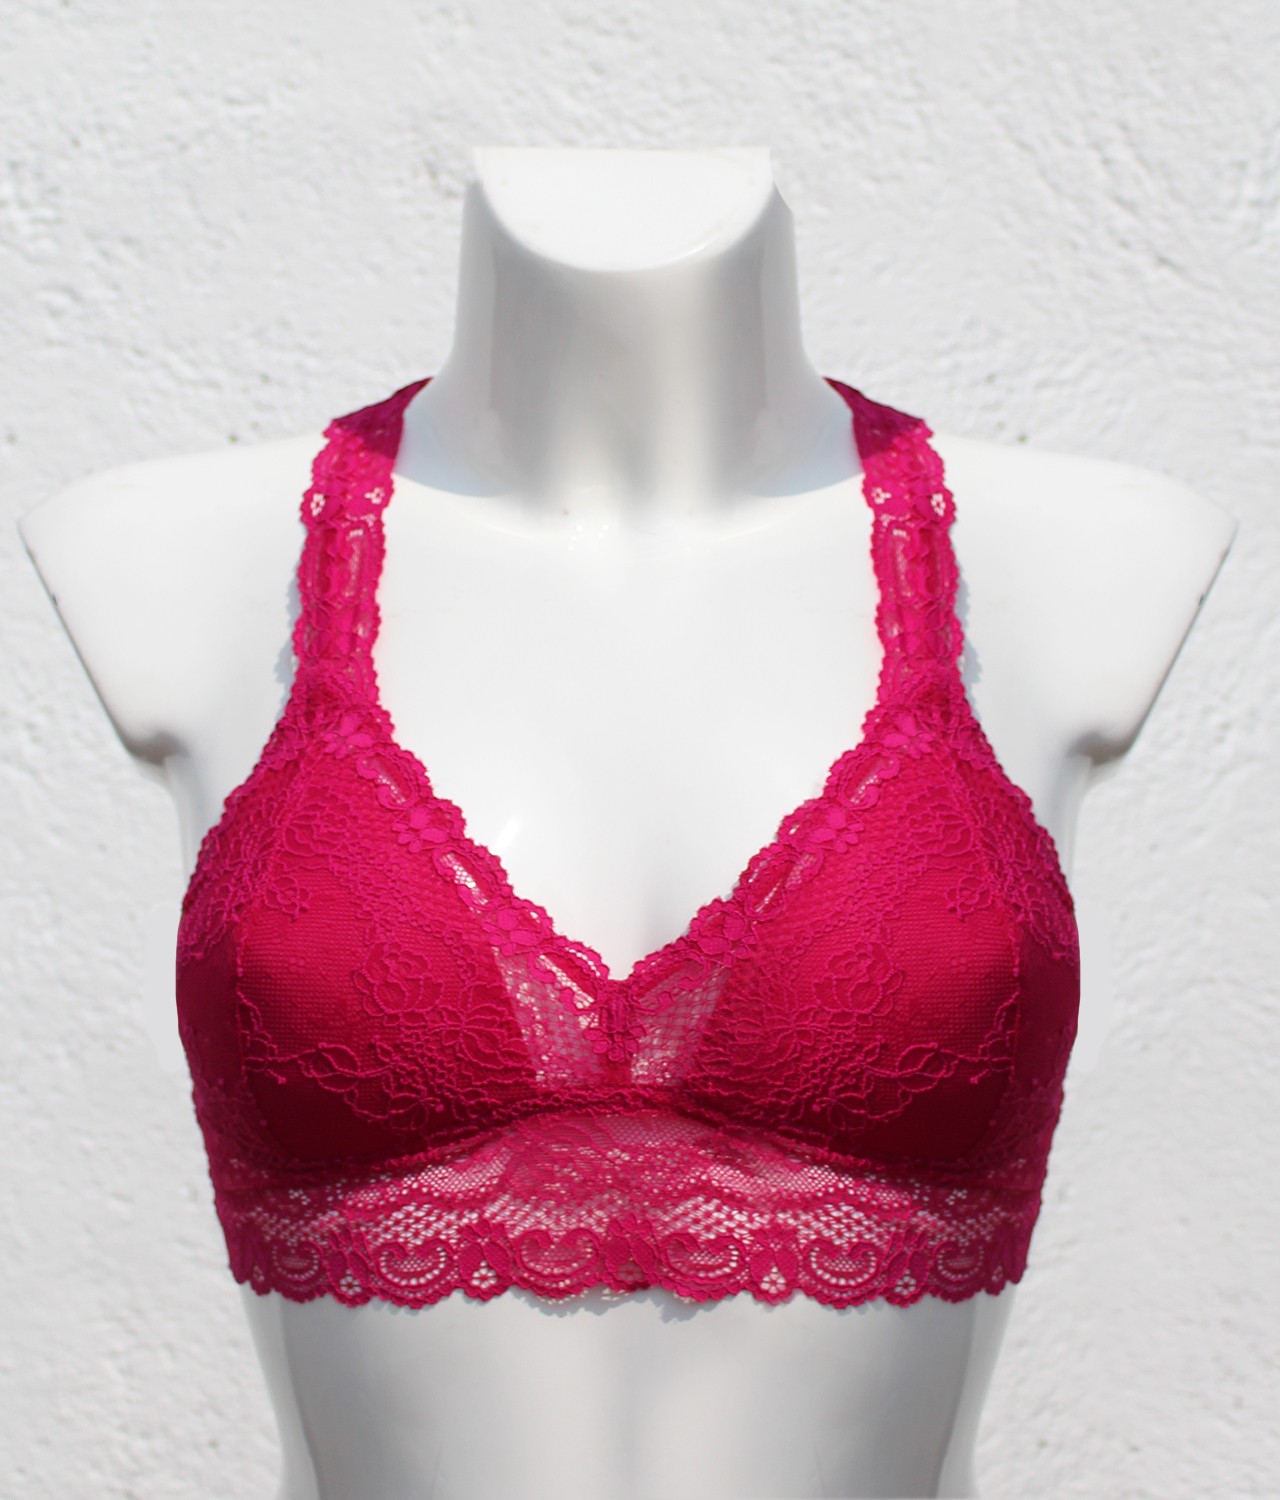 TOFO Lace Bralette (Set of 2) in Blue and Hot Pink (Combo 3)